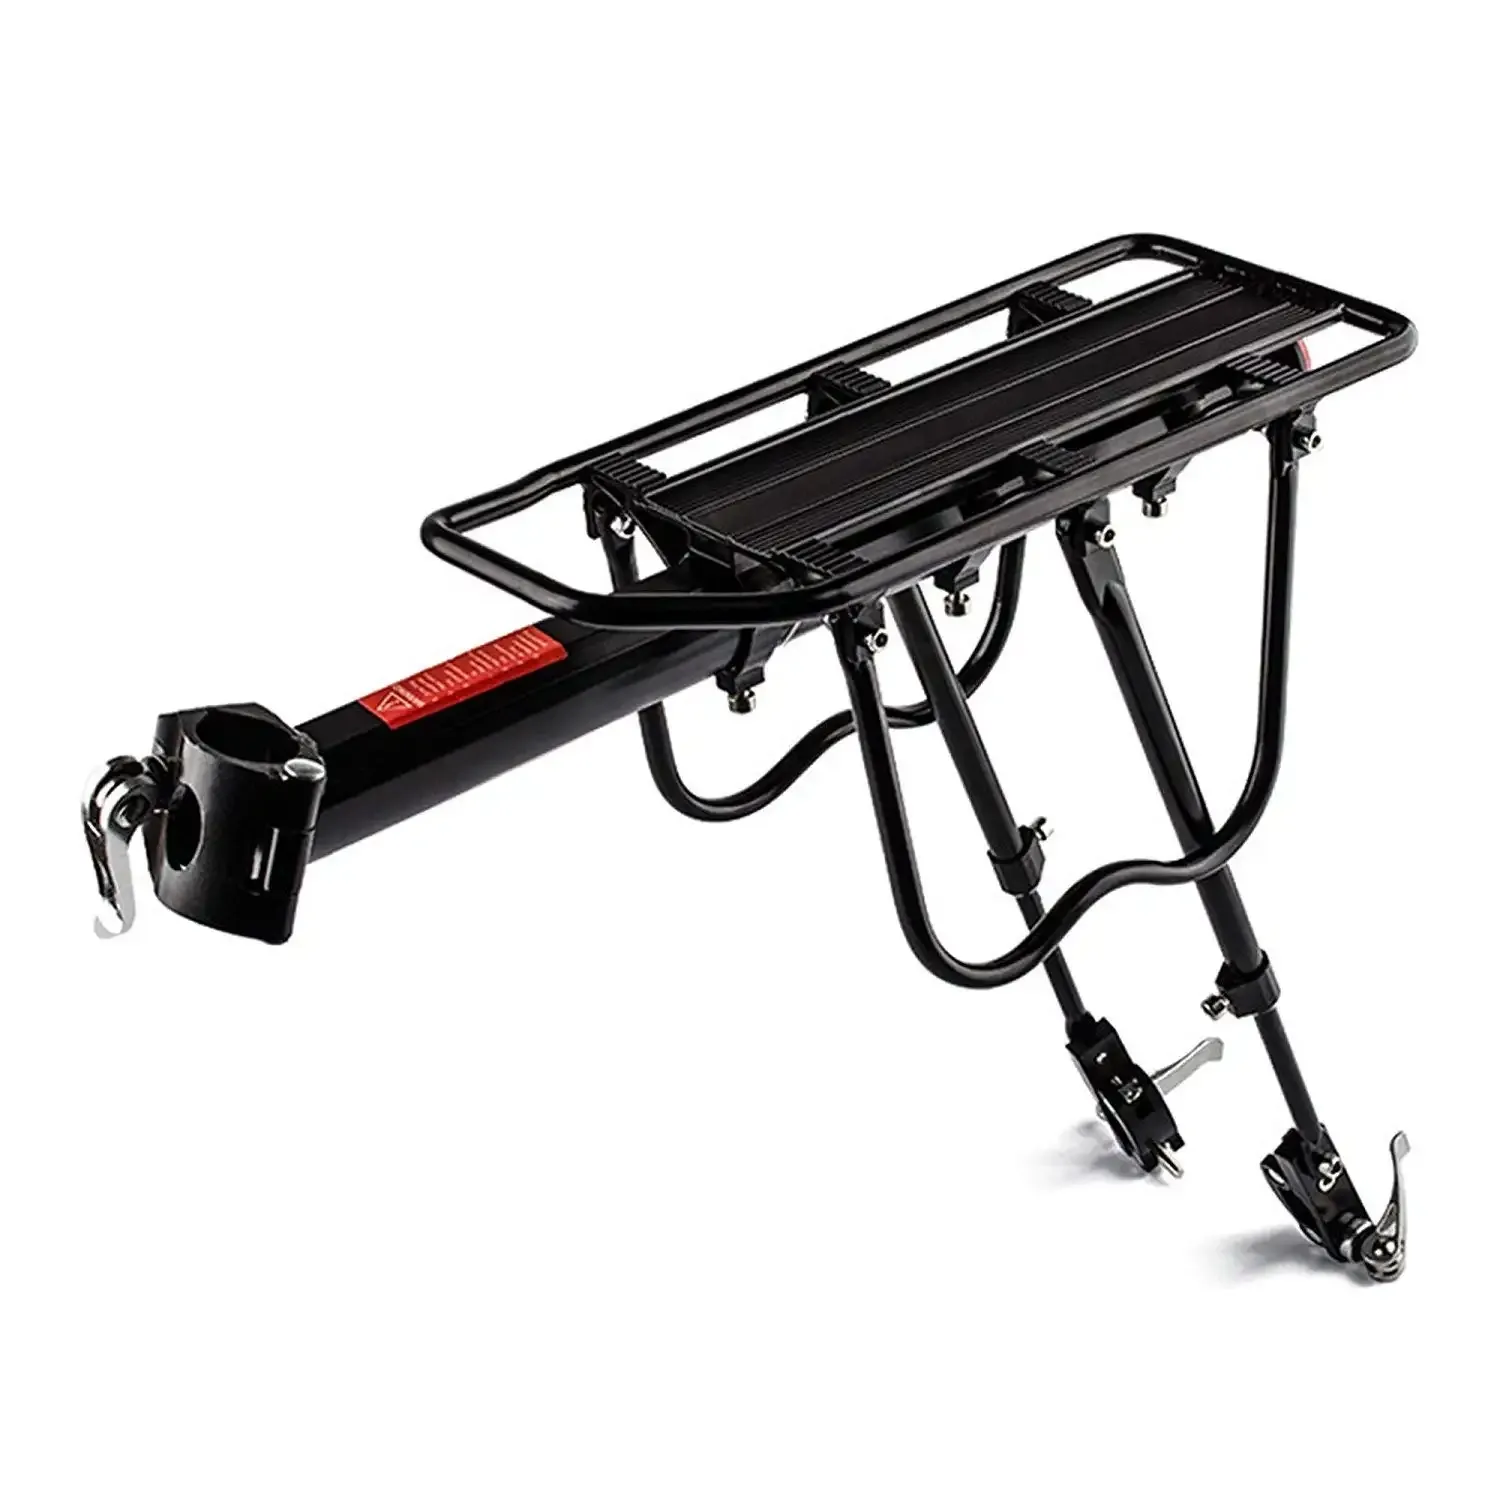 Hot sale Aluminium Alloy Bicycle Rear Carriers Bike Luggage Carrier